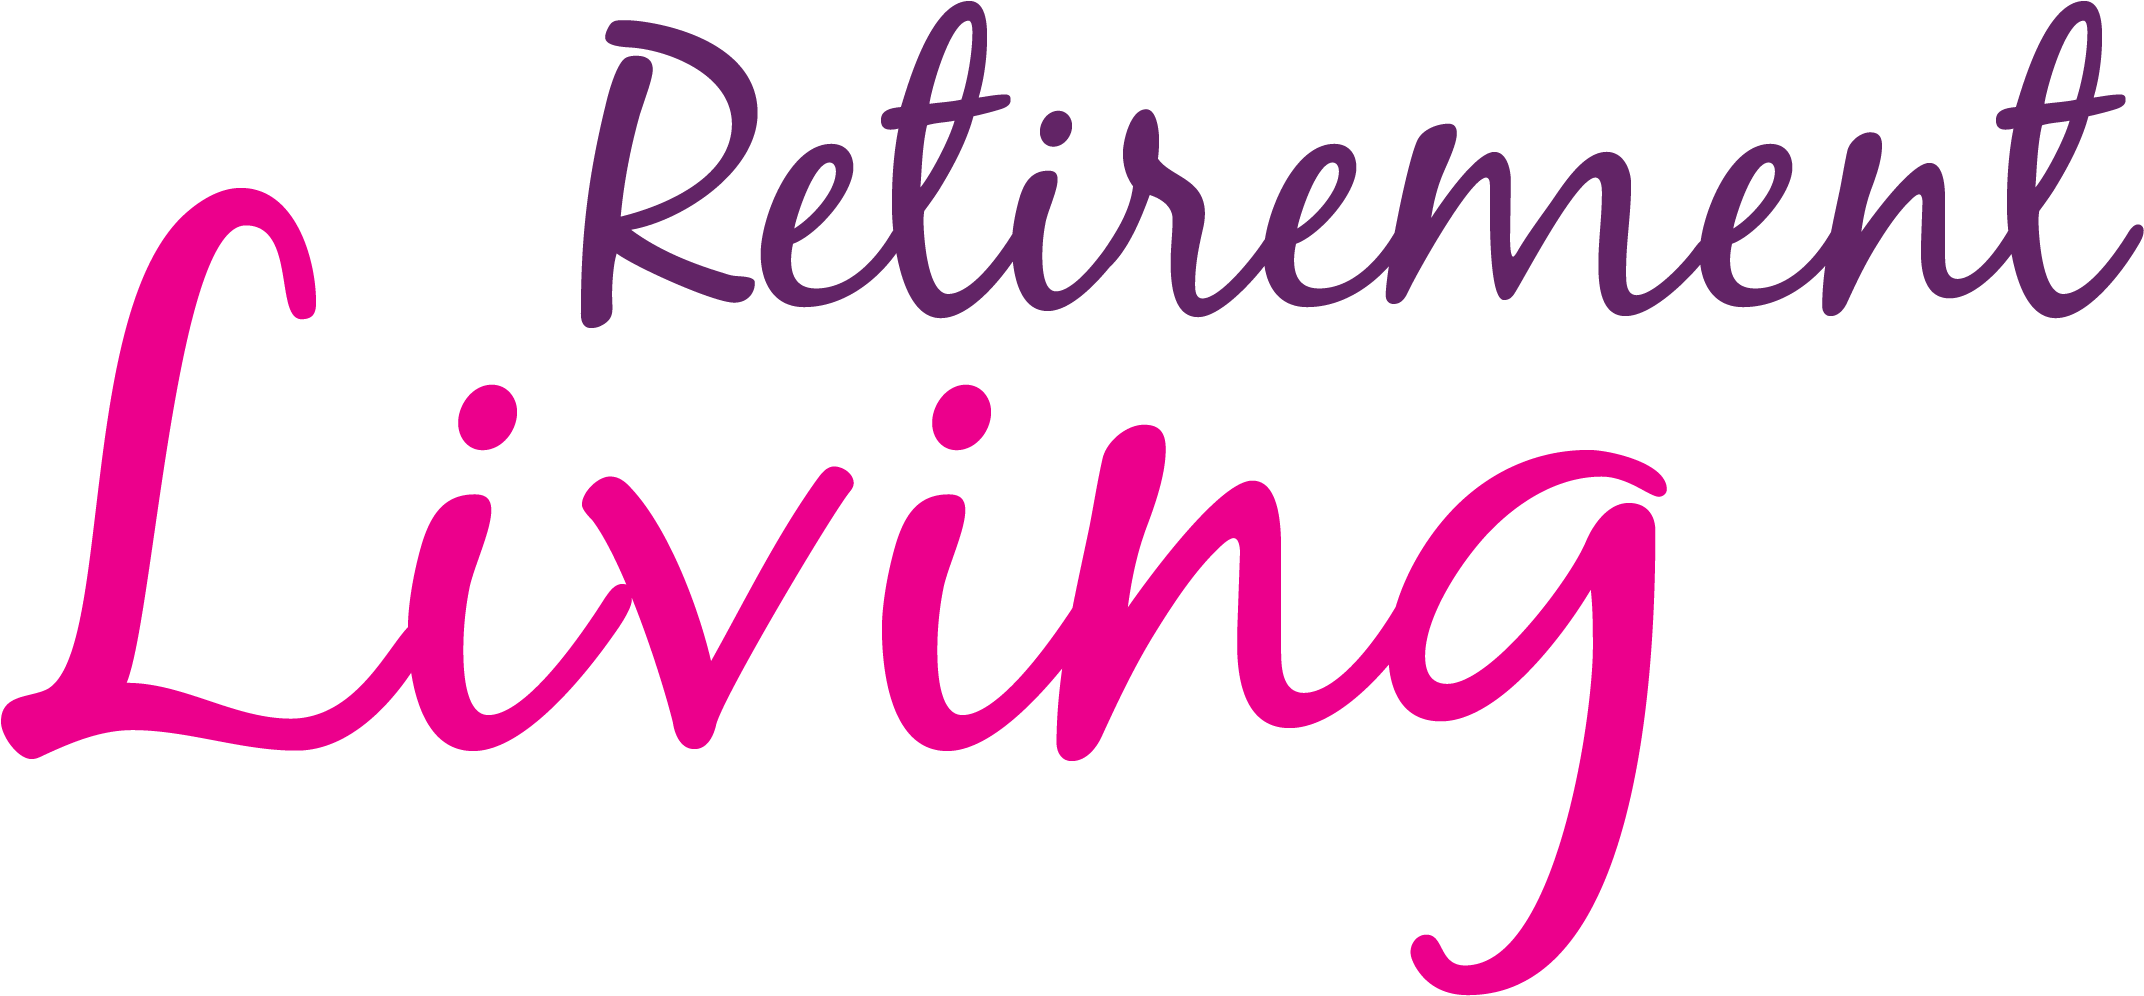 Retirement Living - Calligraphy, Hd Png Download